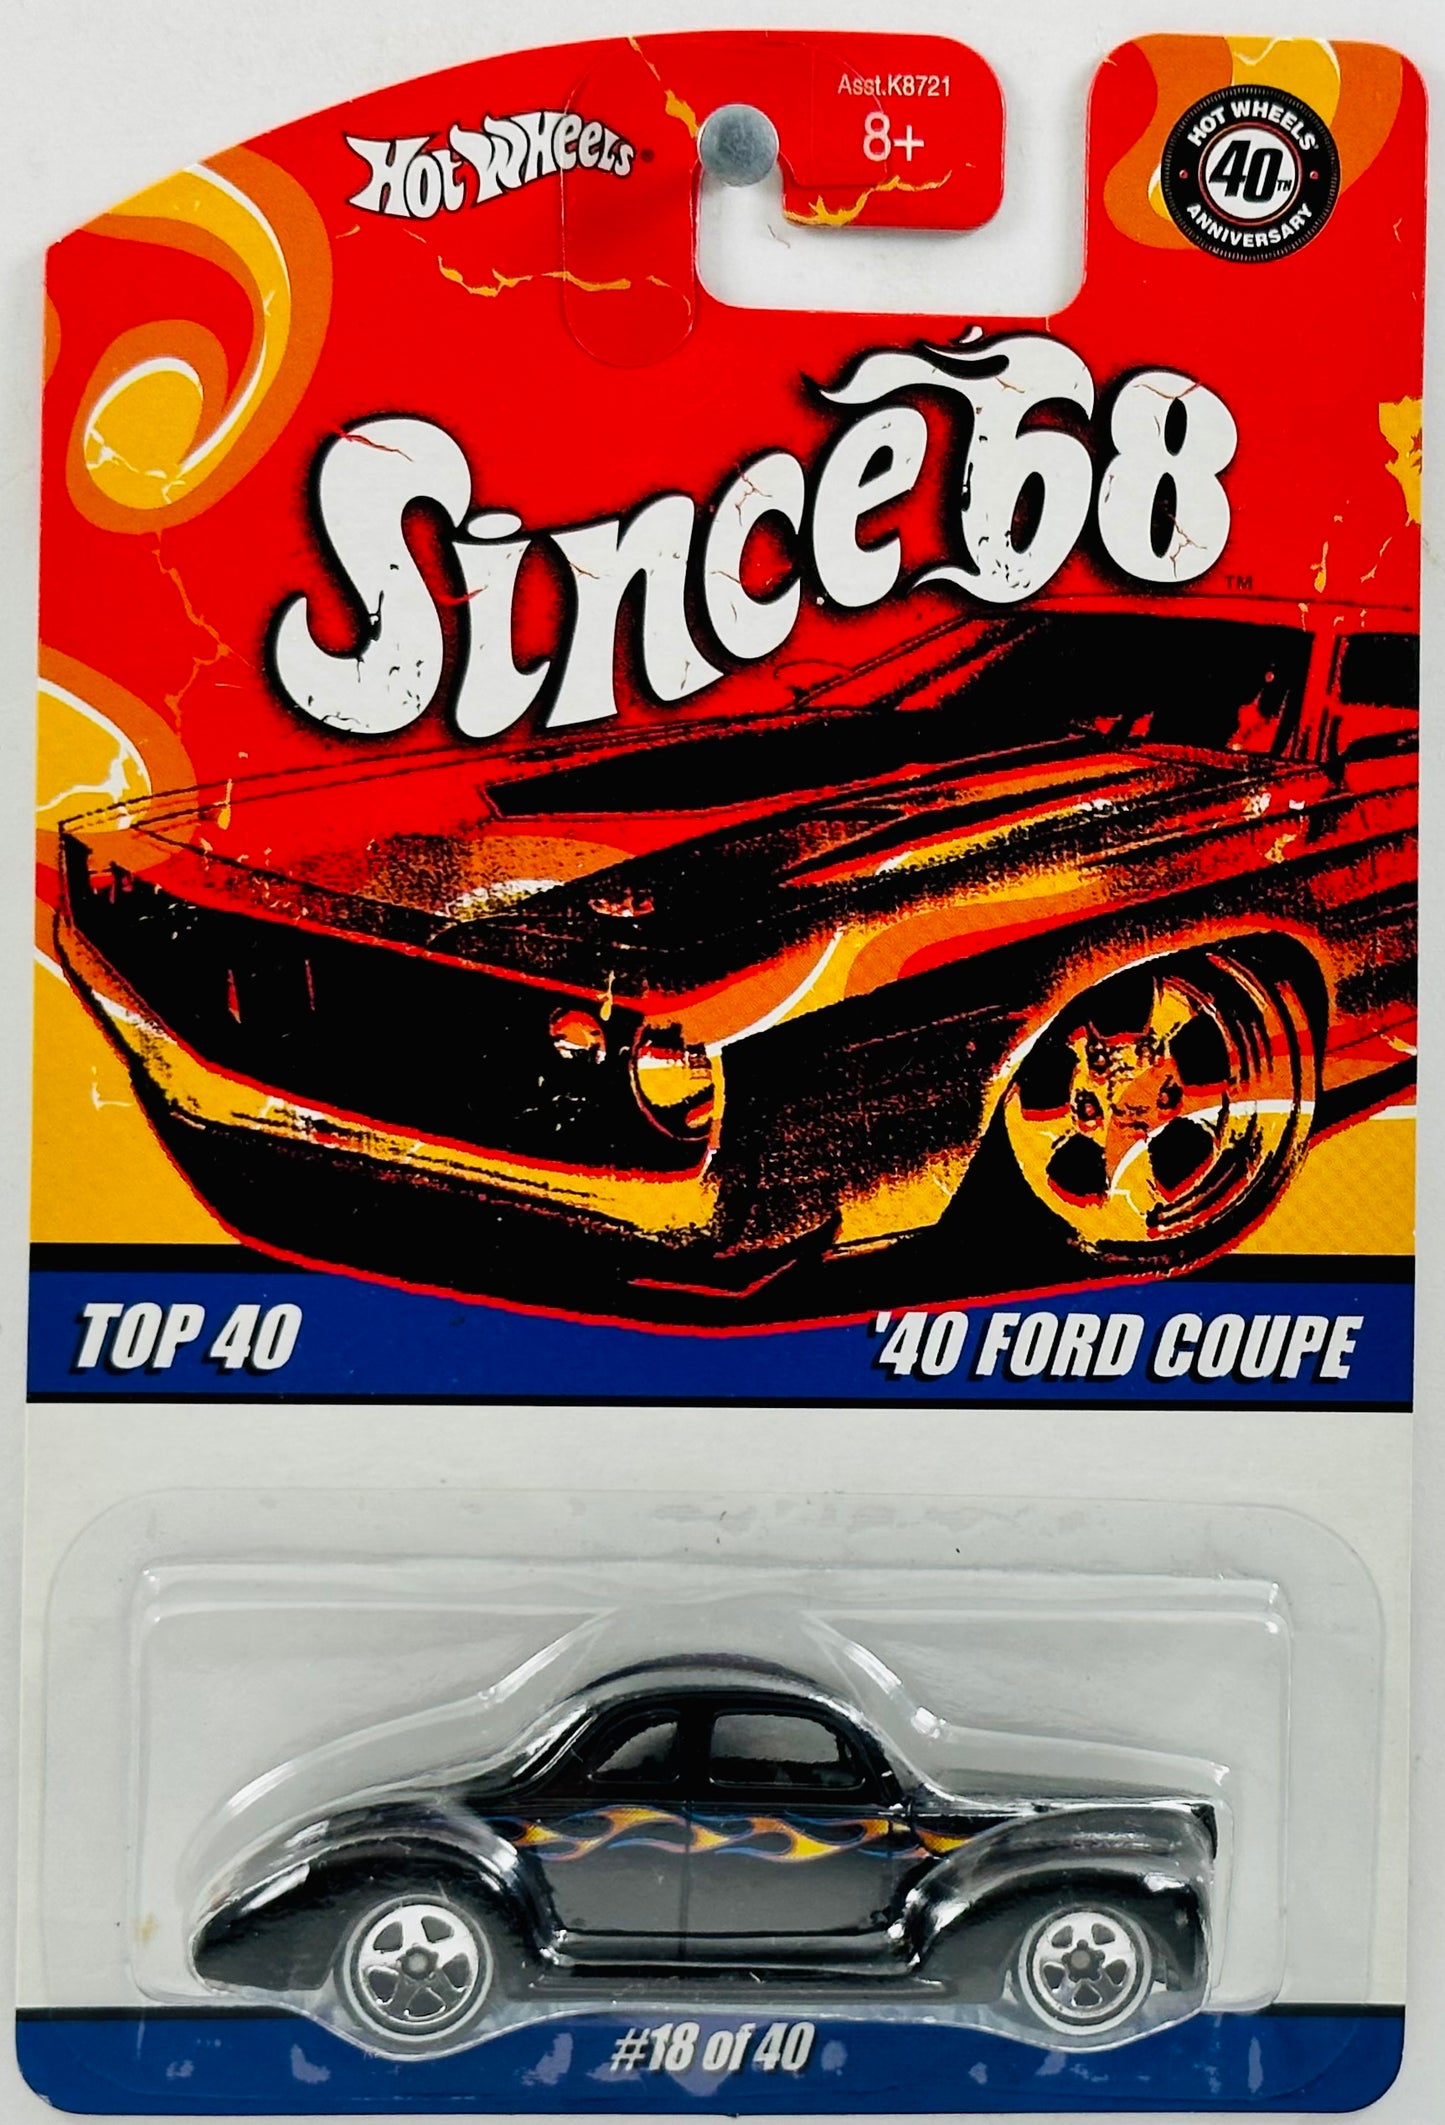 Hot Wheels 2008 - Since '68 / Top 40 # 18/40 - '40 Ford Coupe - Black - 5 Spokes on White Lines - Metal/Metal